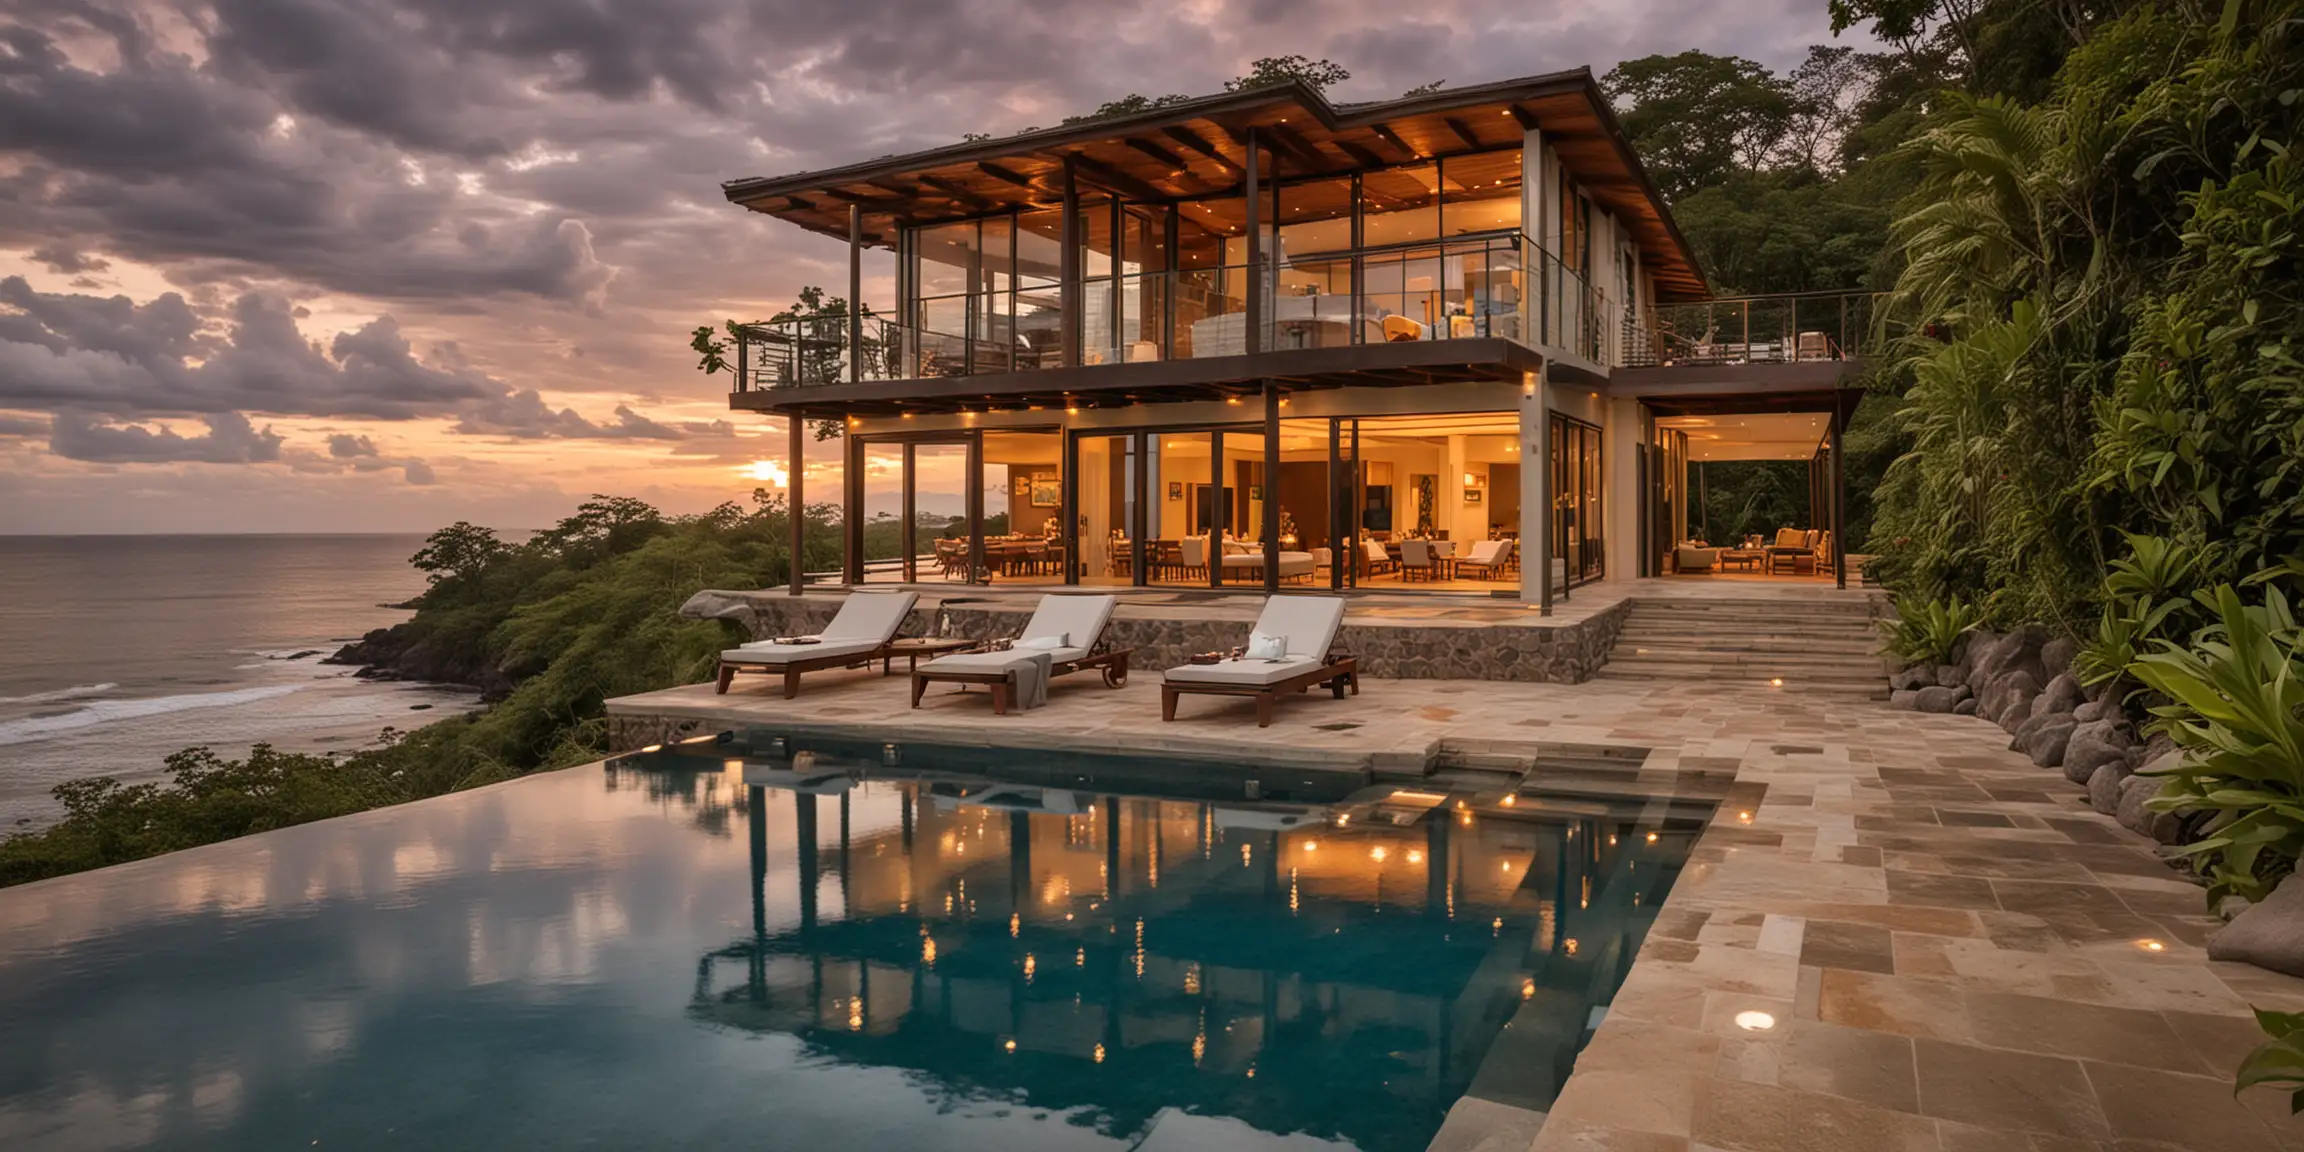 Oceanfront Contemporary Vacation Home in Costa Rica with Infinity Pool at Sunset